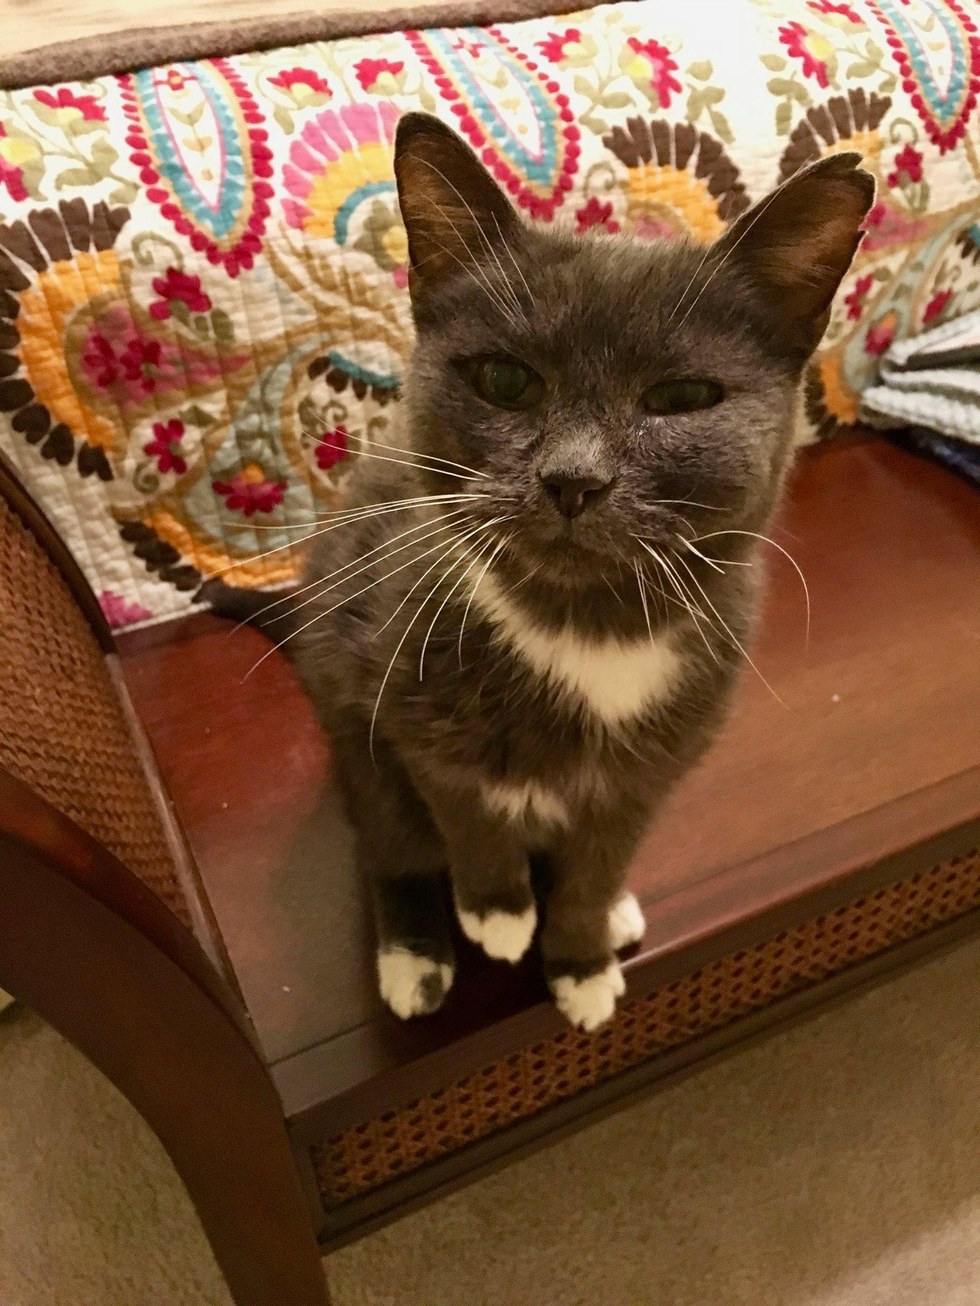 23-year-old Cat Given Up to Shelter Is So Thankful to Be Loved Again